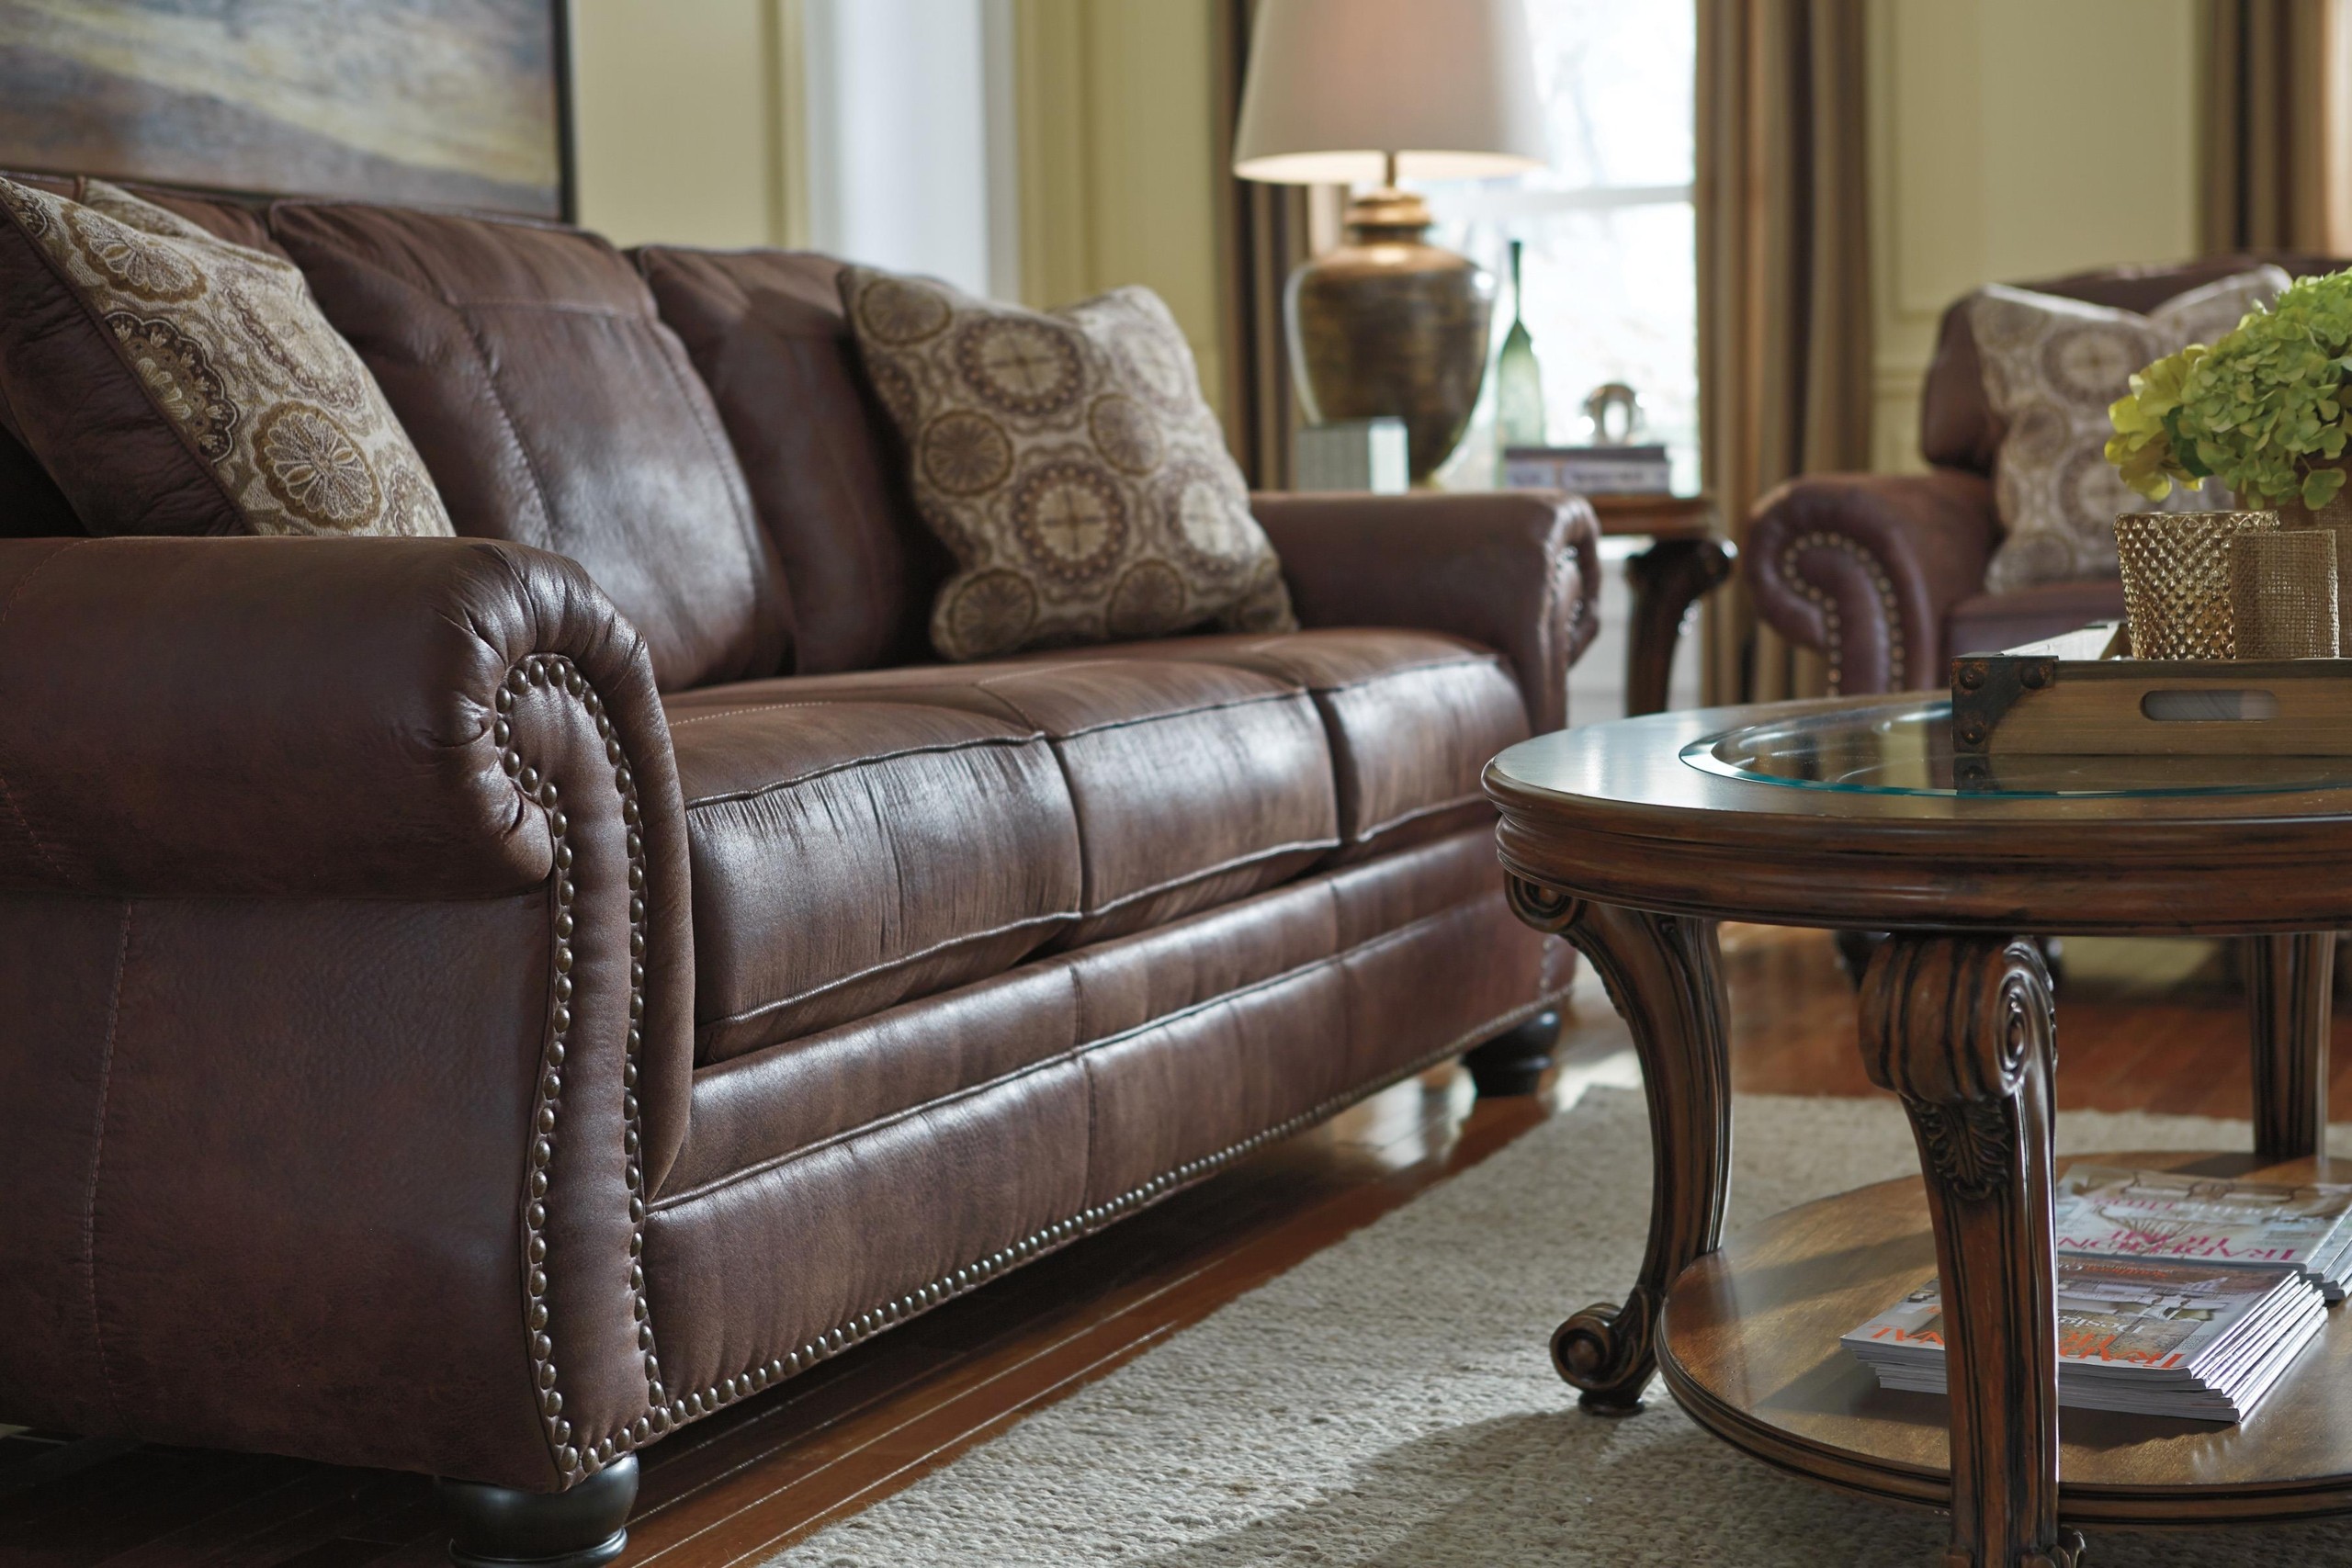 Benchcraft breville faux leather sofa with rolled arms and